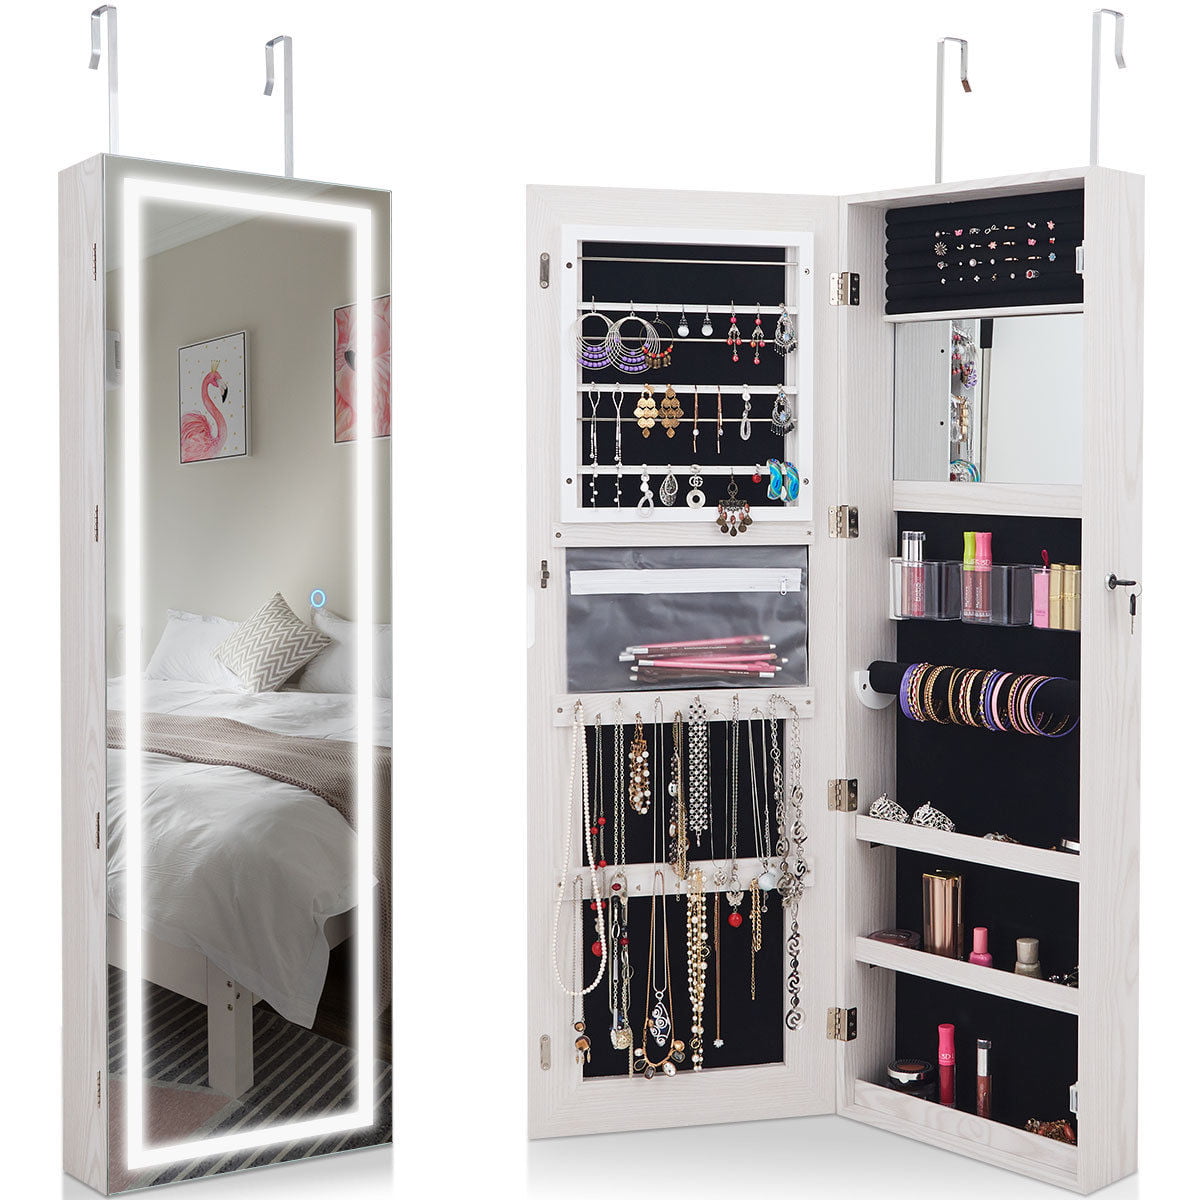 Lockable Wall Mount Mirrored Jewelry Cabinet Organizer Armoire w/ LED Lights US 